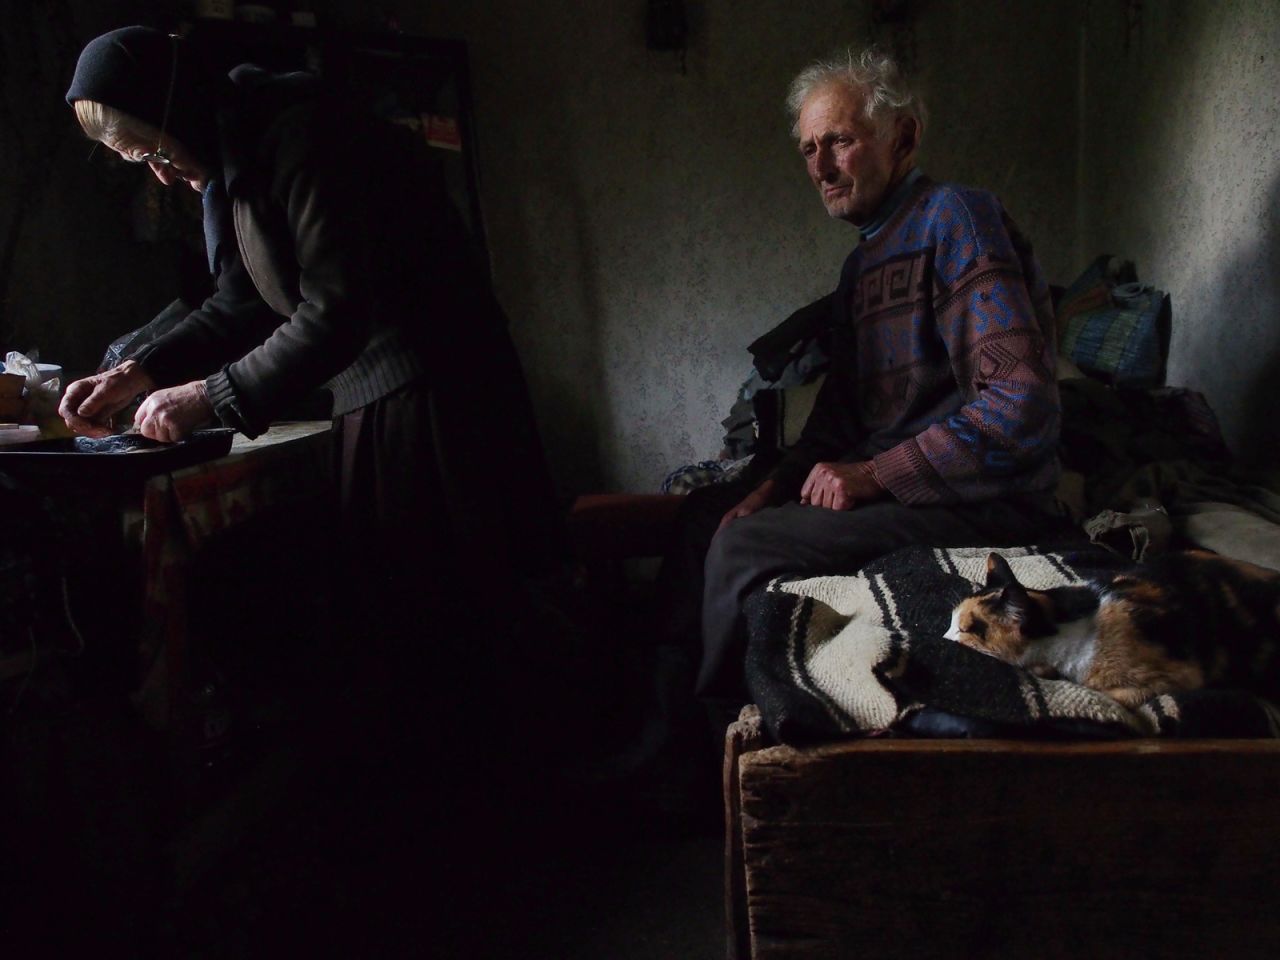 <strong>Honorable Mention People: "Waiting"</strong><br /><br />Location: Village of Sarbi, Maramure (Romania) <br /><br />Photo and caption by <a href="http://photography.nationalgeographic.com/photography/photo-contest/2014/users/2856841/" target="_blank" target="_blank">Roberto Fiore</a>/National Geographic 2014 Photo Contest<br /><br />Roberto Fiore says: "He was waiting on the bed, lost in thoughts, while his wife was preparing the bread to be blessed for the orthodox Eucharist."